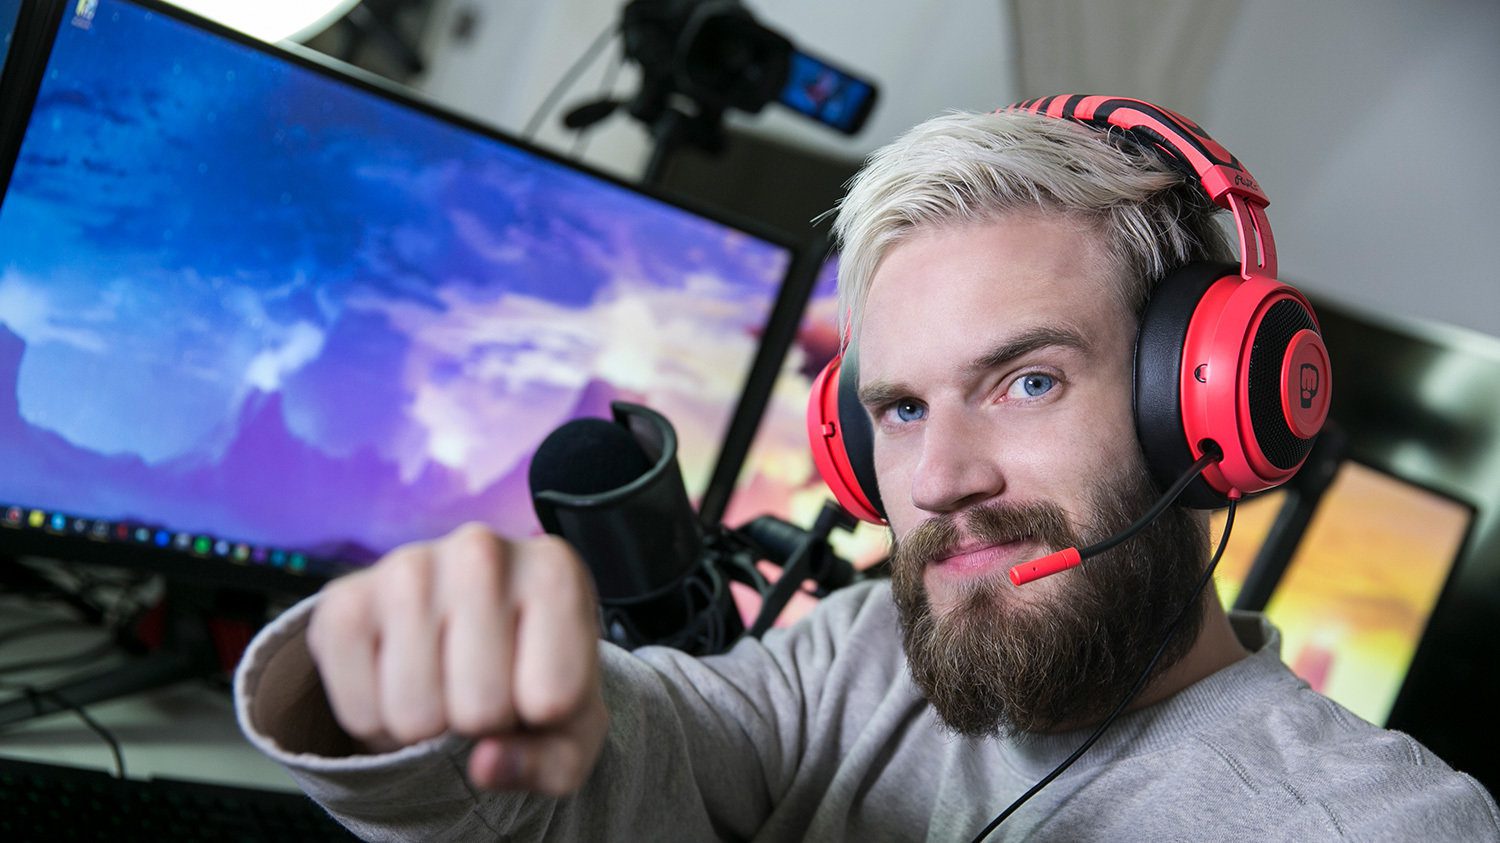 Pewdiepie Seemingly Pulls $50,000 Pledge To Jewish Charity After Fans Spread Conspiracy Theories